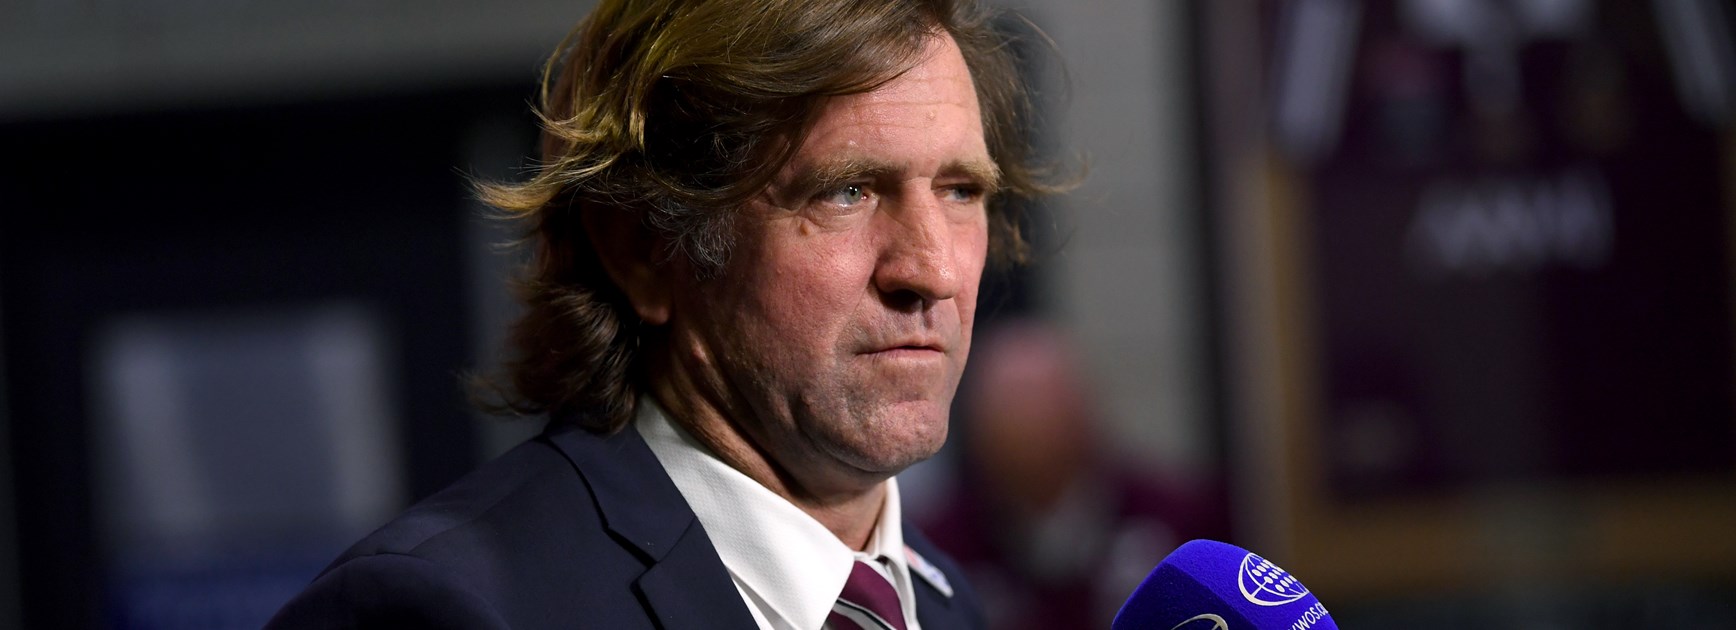 Sea Eagles part ways with Des Hasler as coach